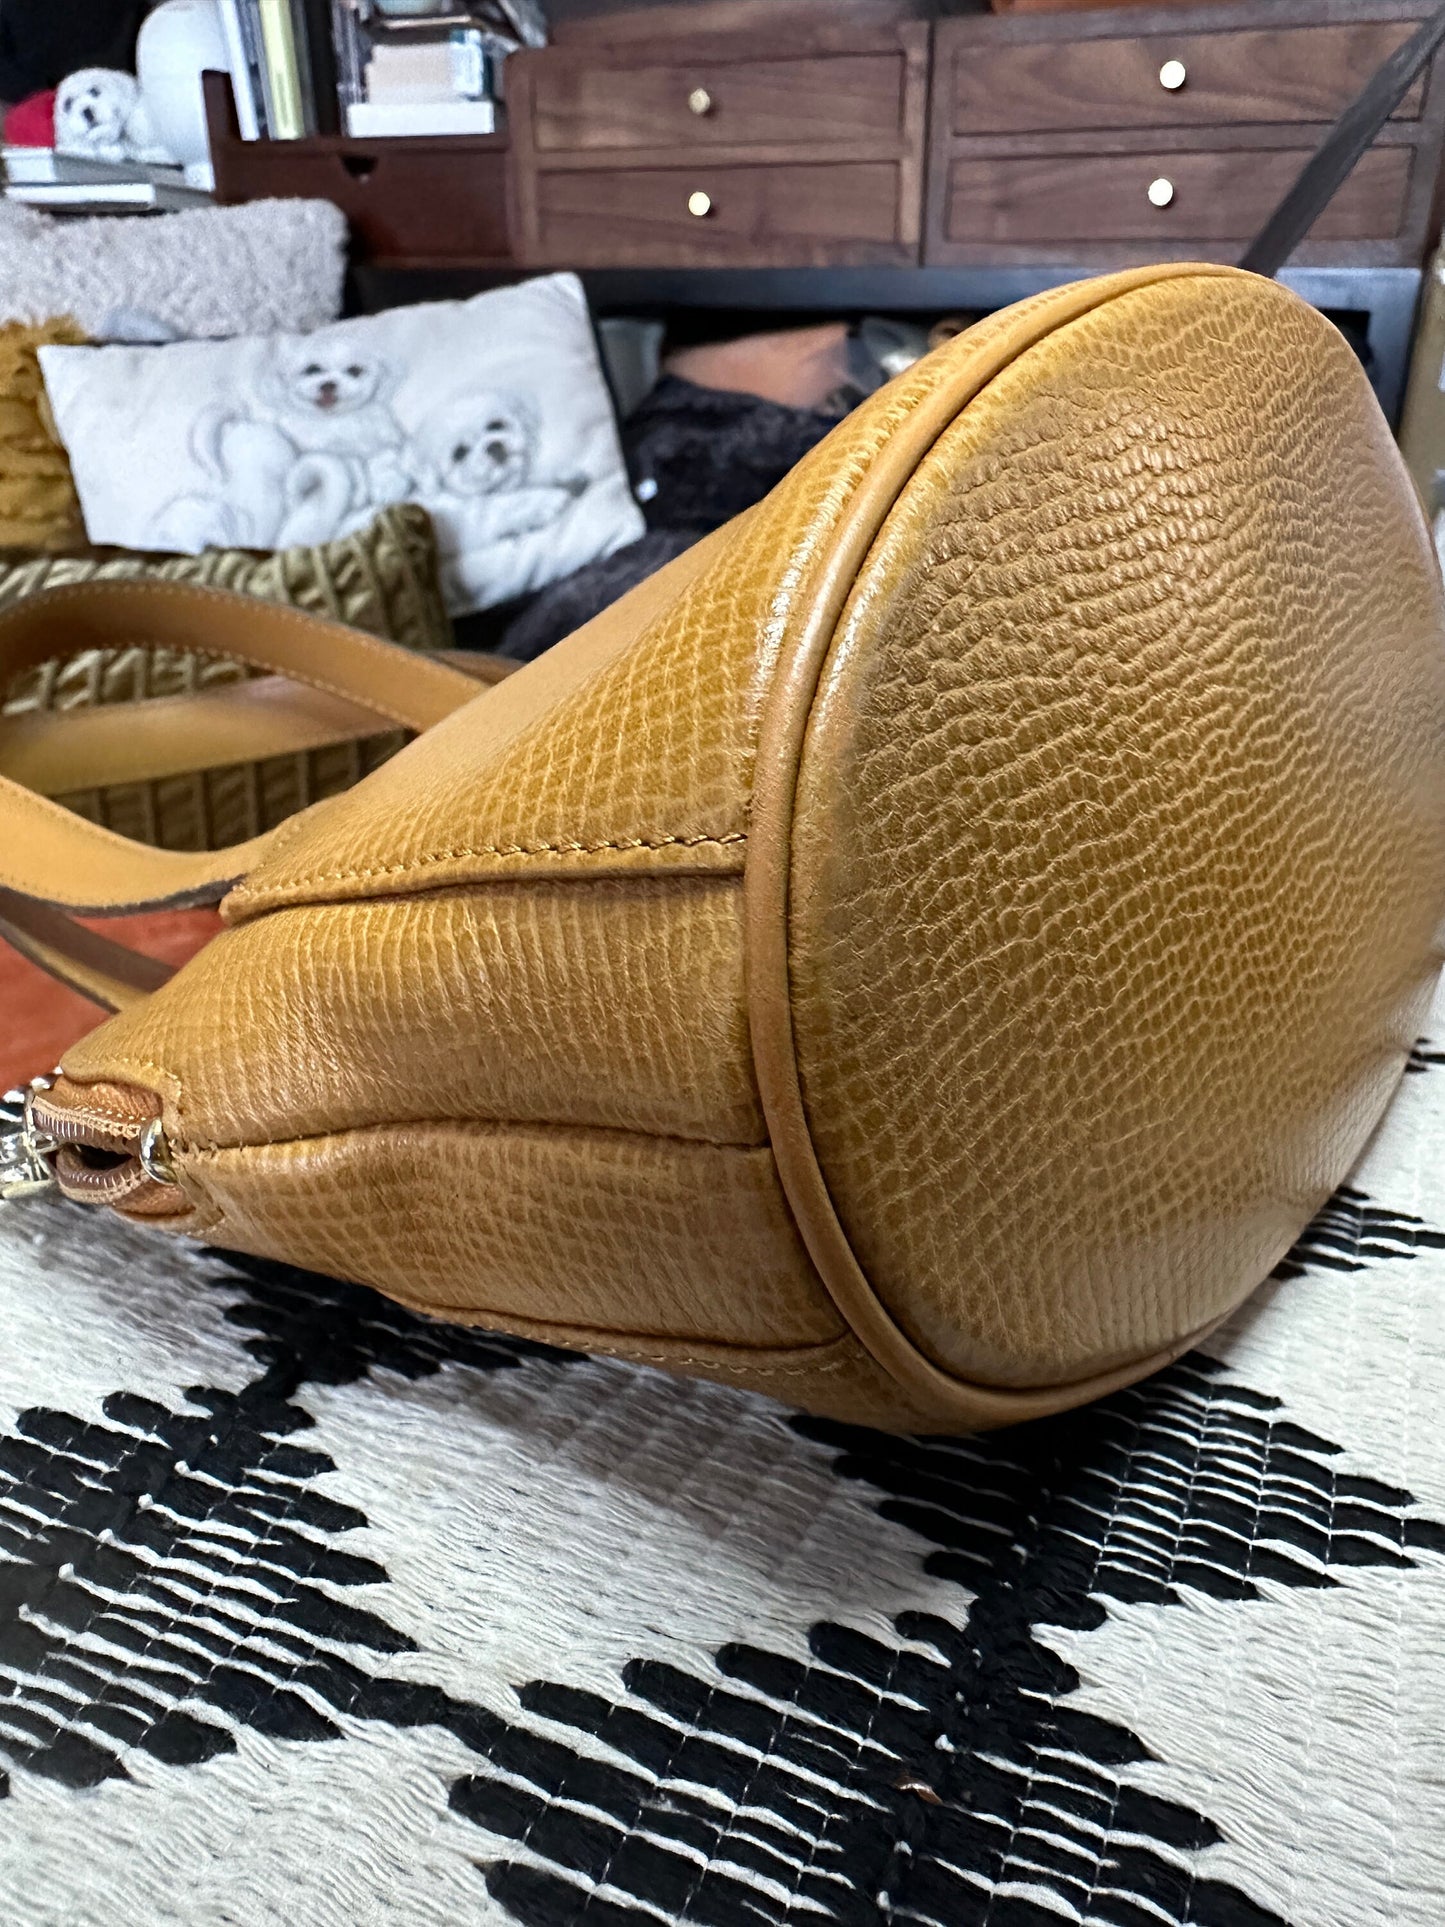 CHRISTIAN DIOR VINTAGE, 100% Authentic Genuine, Leather Hand Bag, Deep Yellow, 2000's, Great Condition, Rare